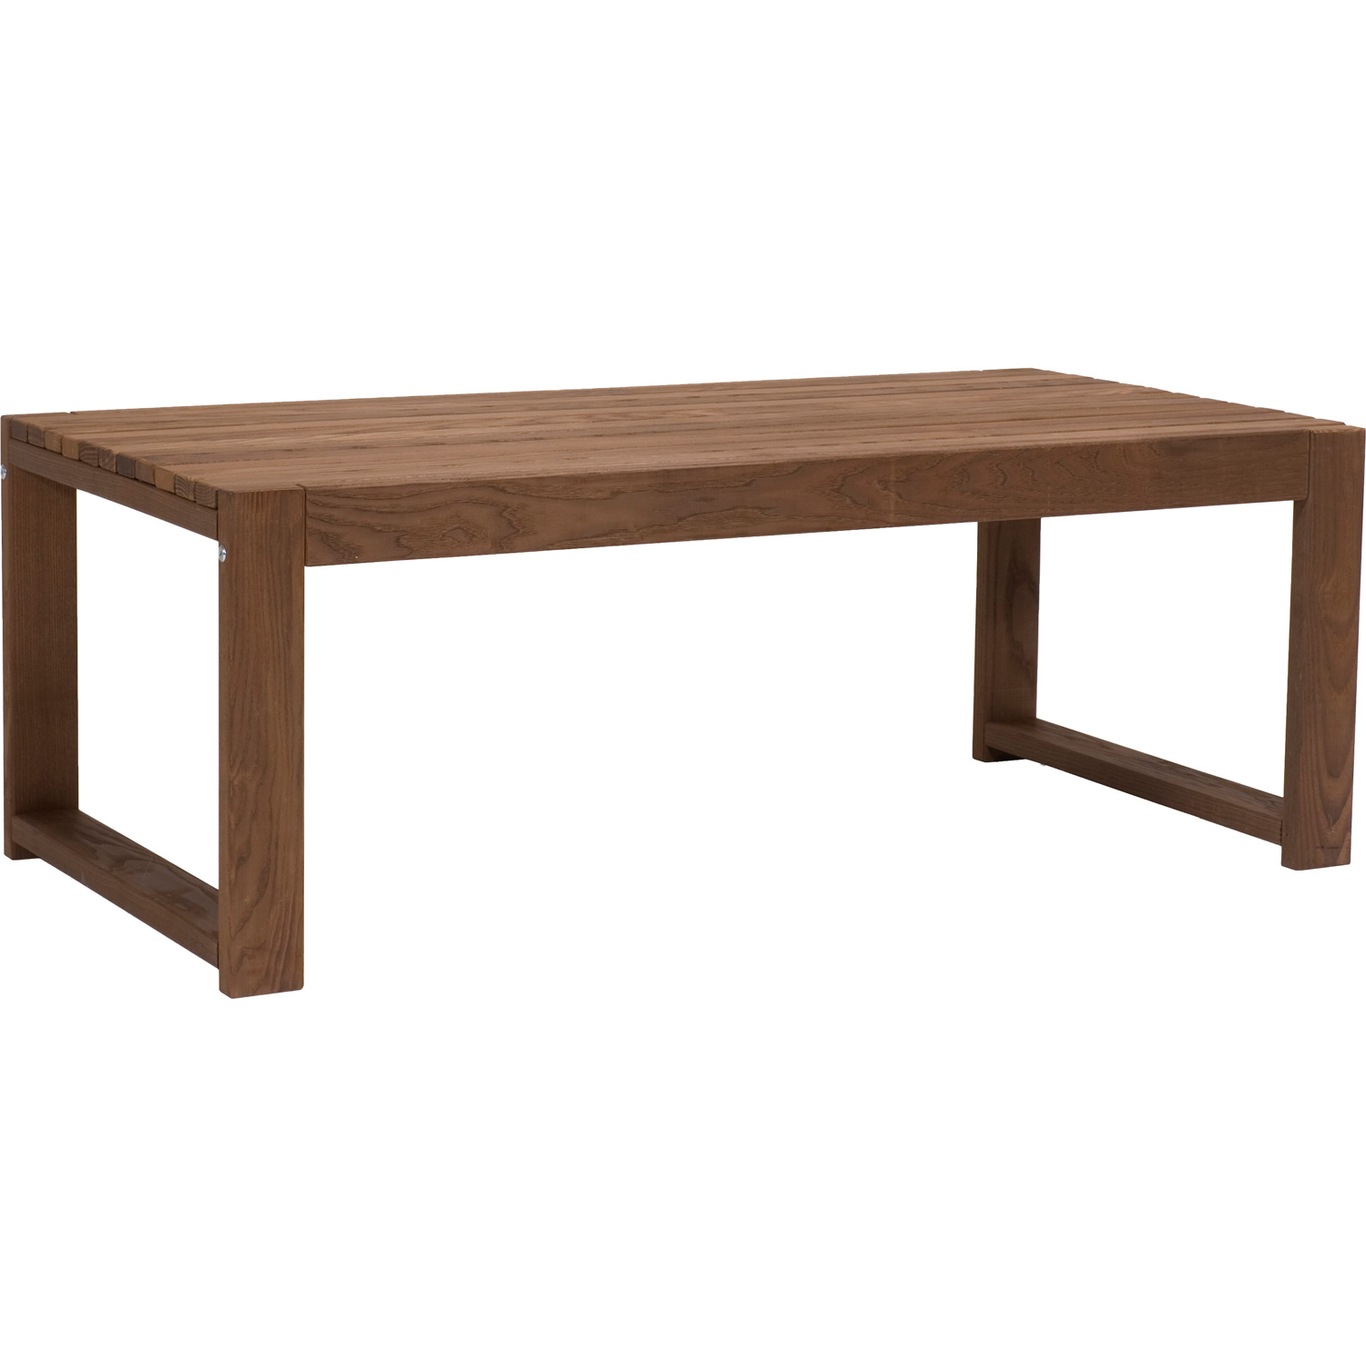 Gotland Lounge Table 60x120 cm, Thermotreated Ash